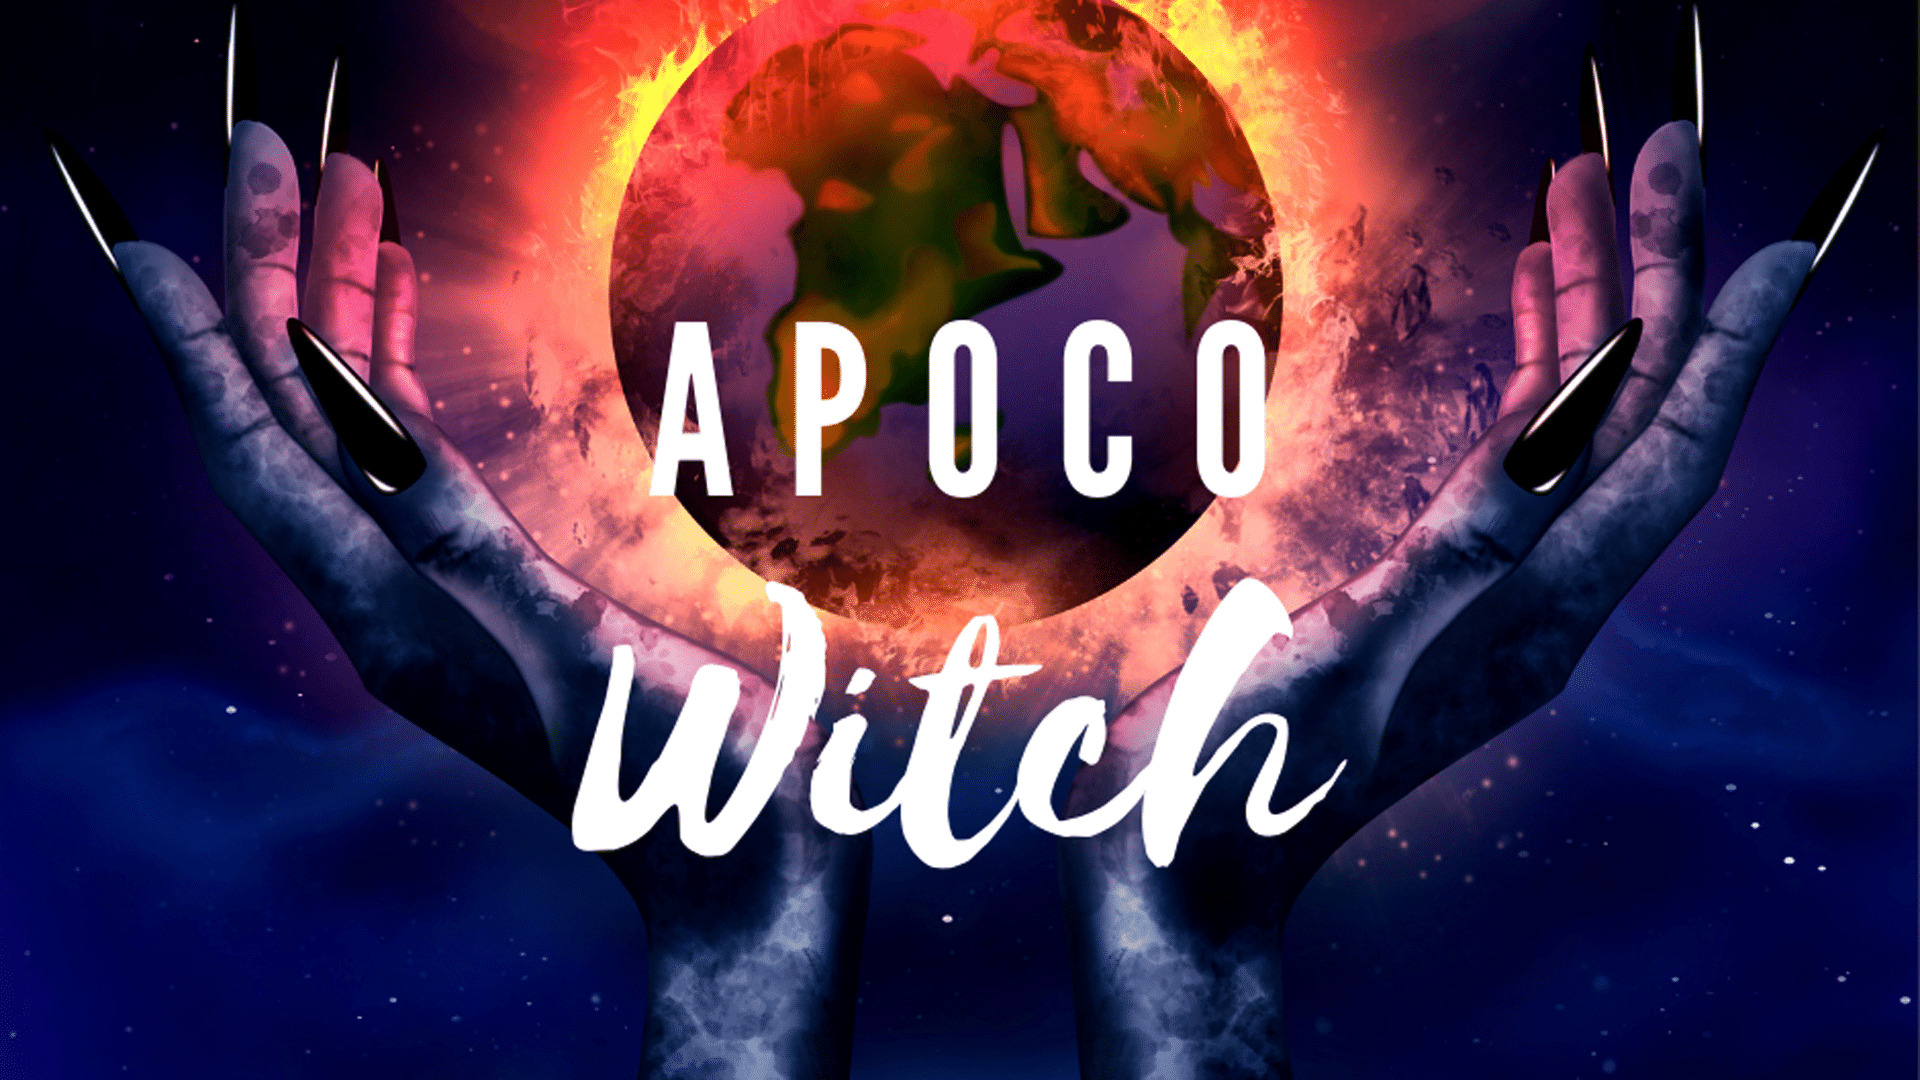 ApocoWitch – Opening Friday 27th May